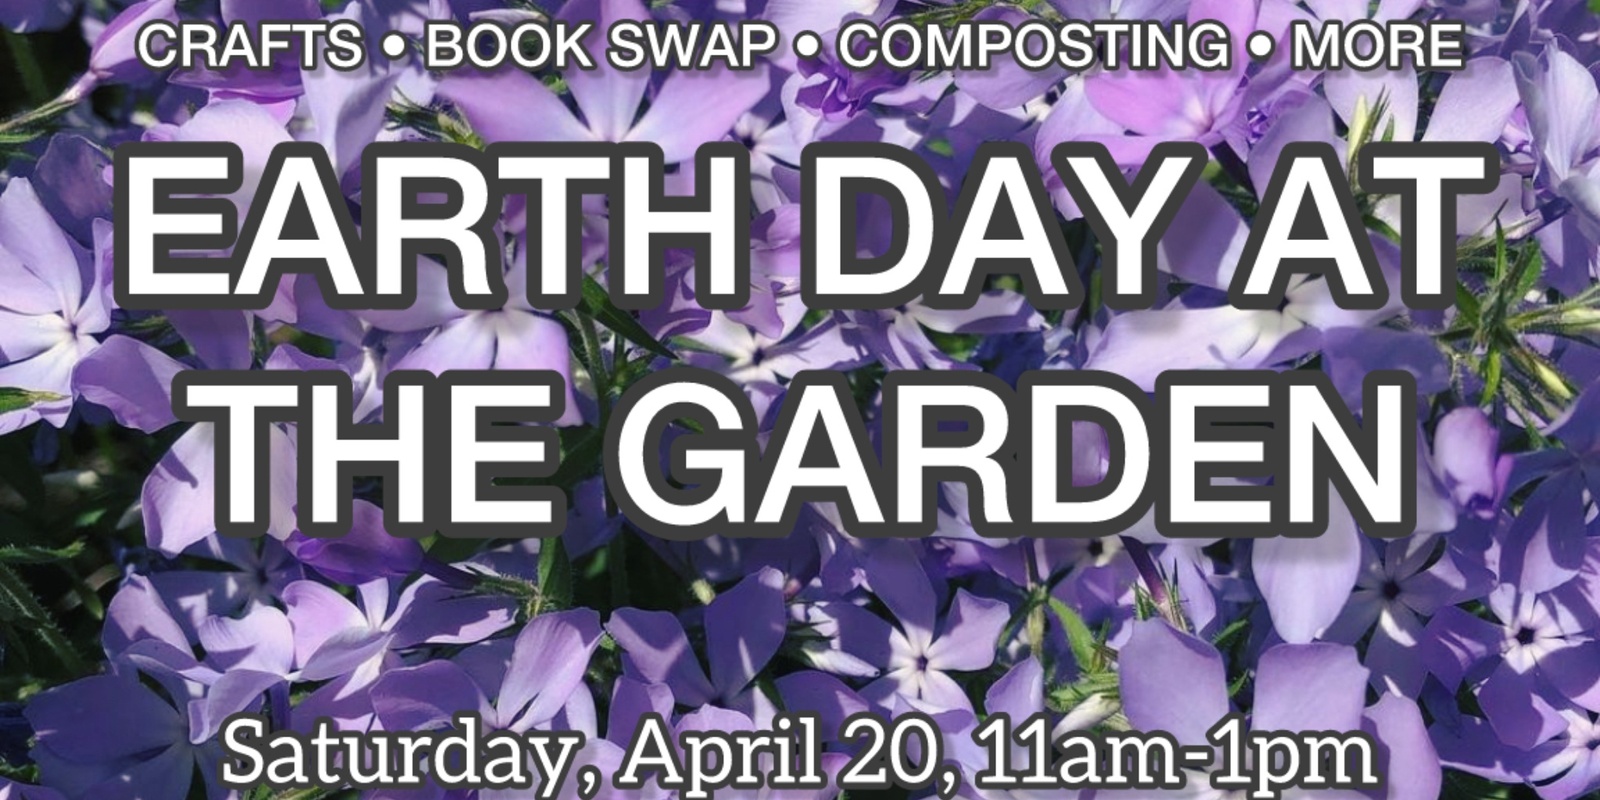 Banner image for Earth Day at the Garden